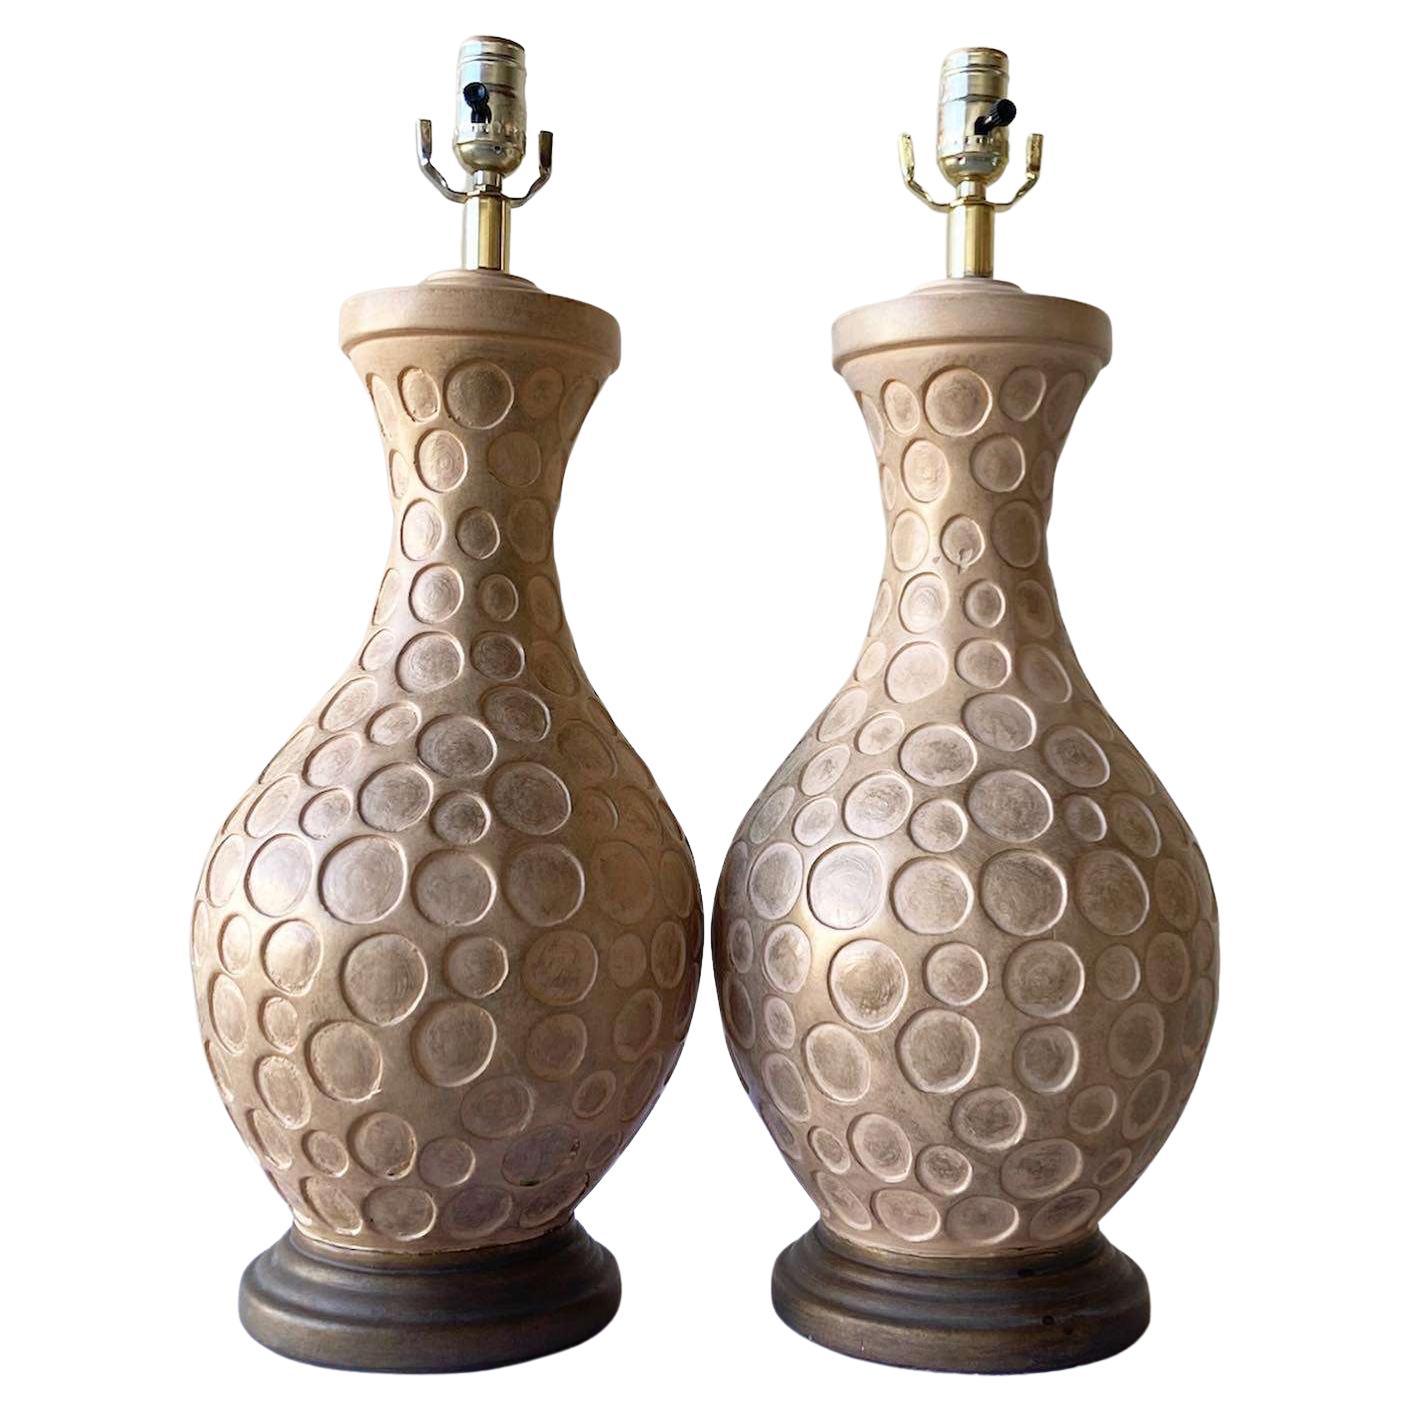 Postmodern Tan Ceramic Table Lamps on Wood Bases - a Pair For Sale